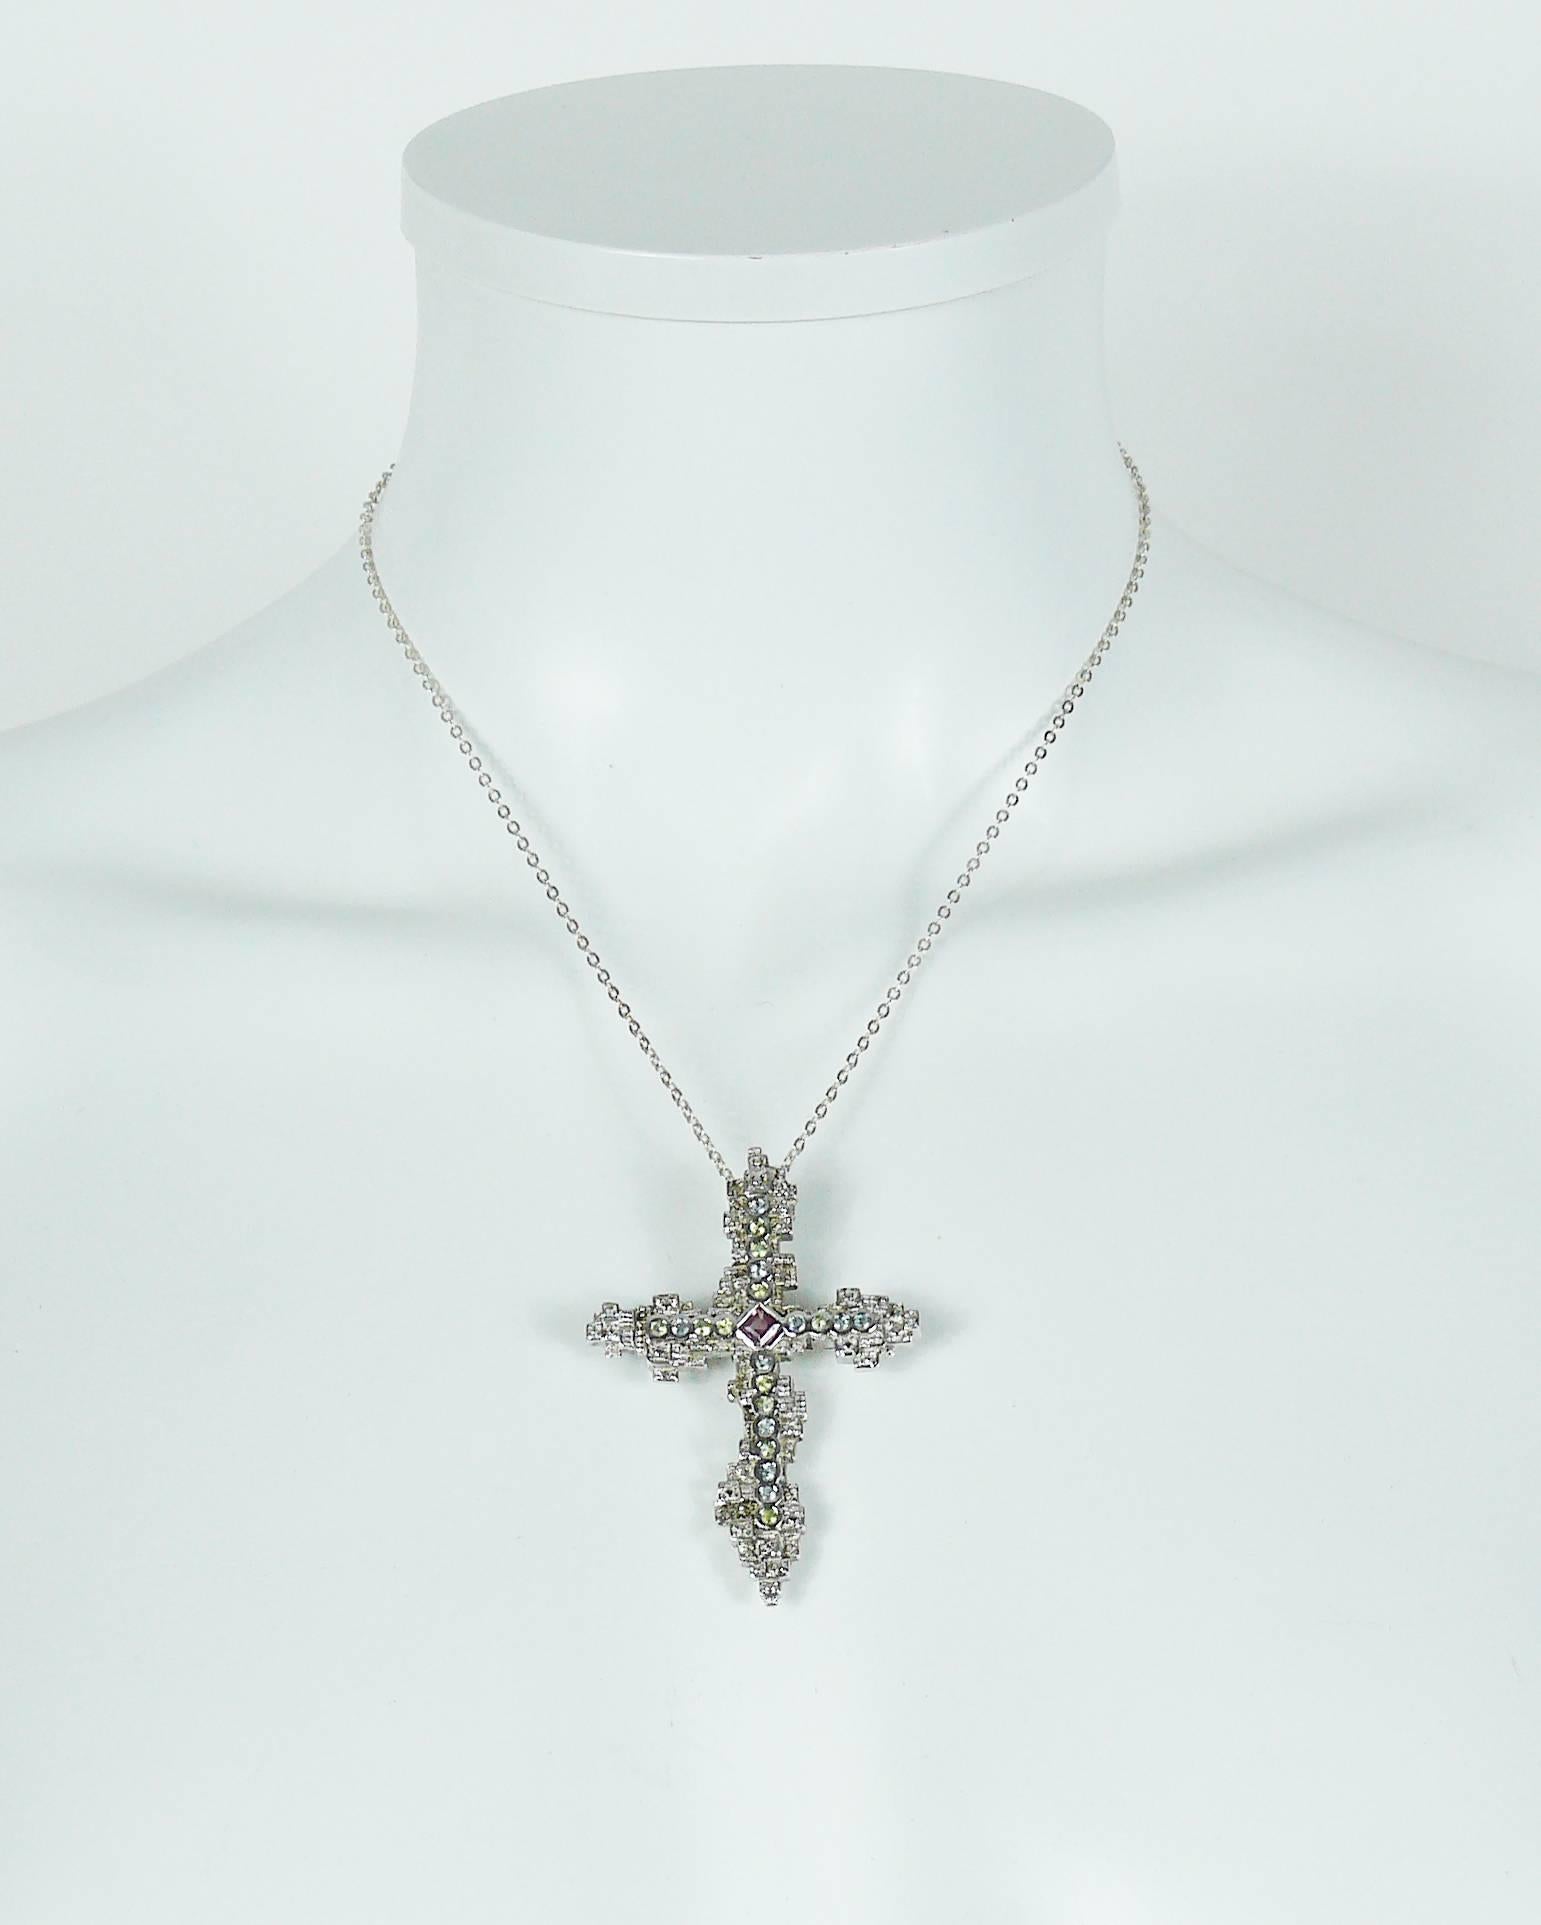 CHRISTIAN LACROIX sterling silver cross pendant embellished with multicolored crystals.

Can be worn as a brooch.

Sterling silver chain.
Spring clasp closure.

French silver hallmark "Minerve" head (on the reverse of the cross).
Stamped